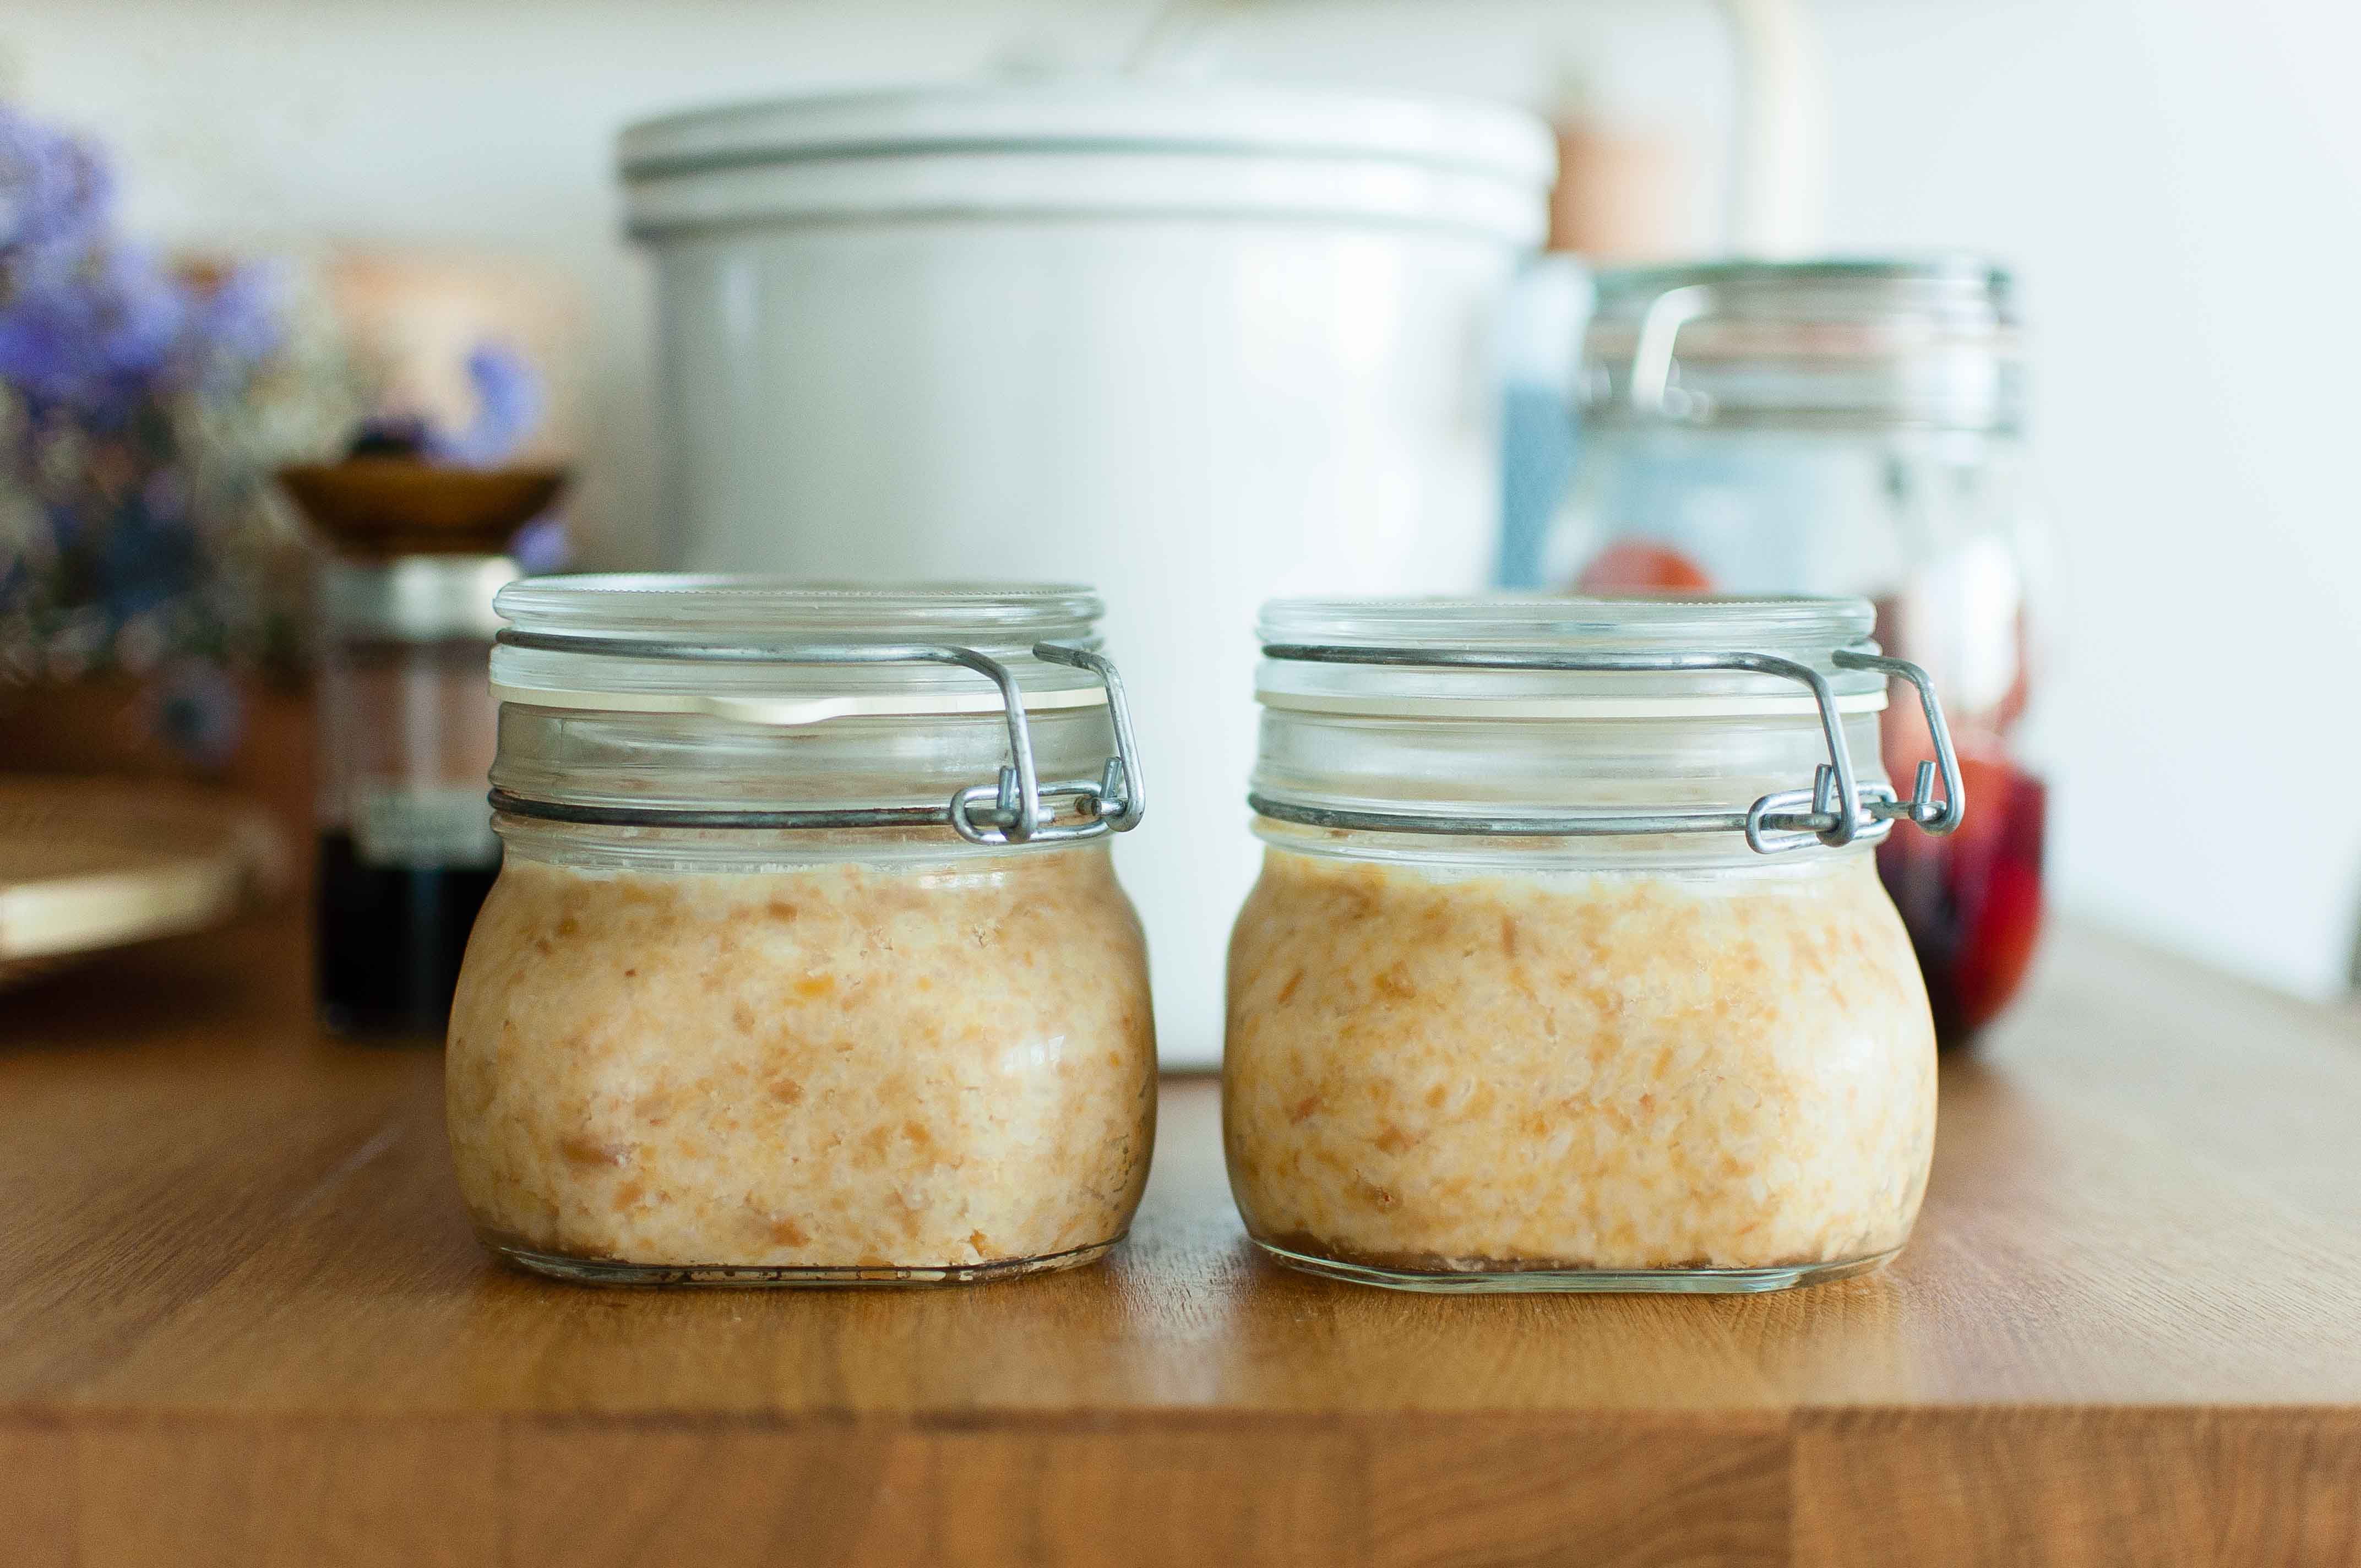 Chickpea Miso Making Class with Marika Groen (Malicaferments) sun 19 march 2.30-4pm